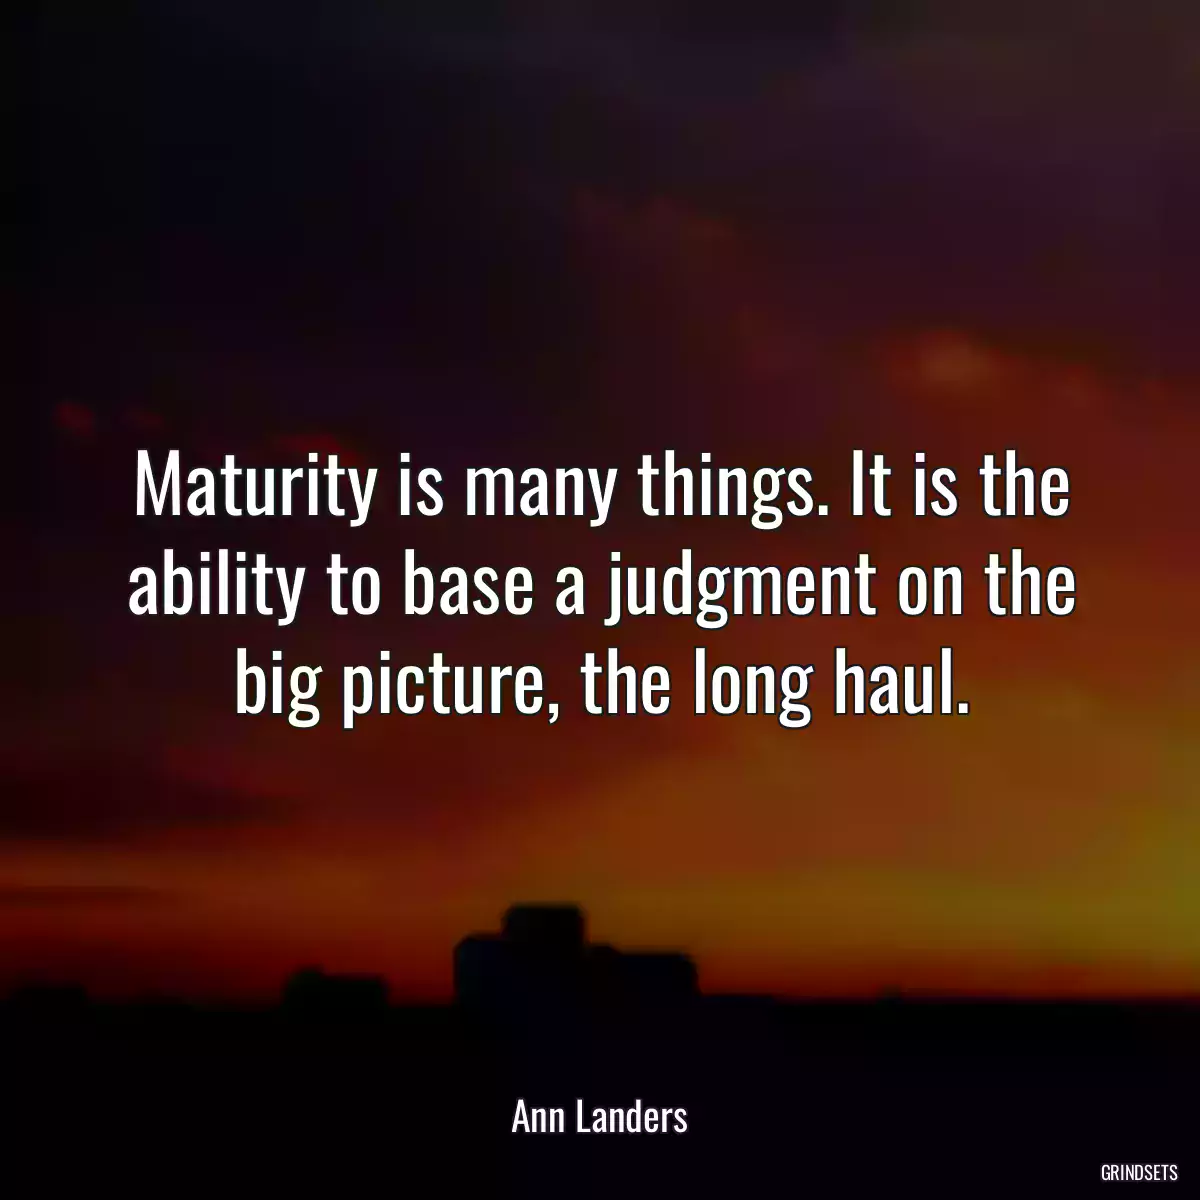 Maturity is many things. It is the ability to base a judgment on the big picture, the long haul.